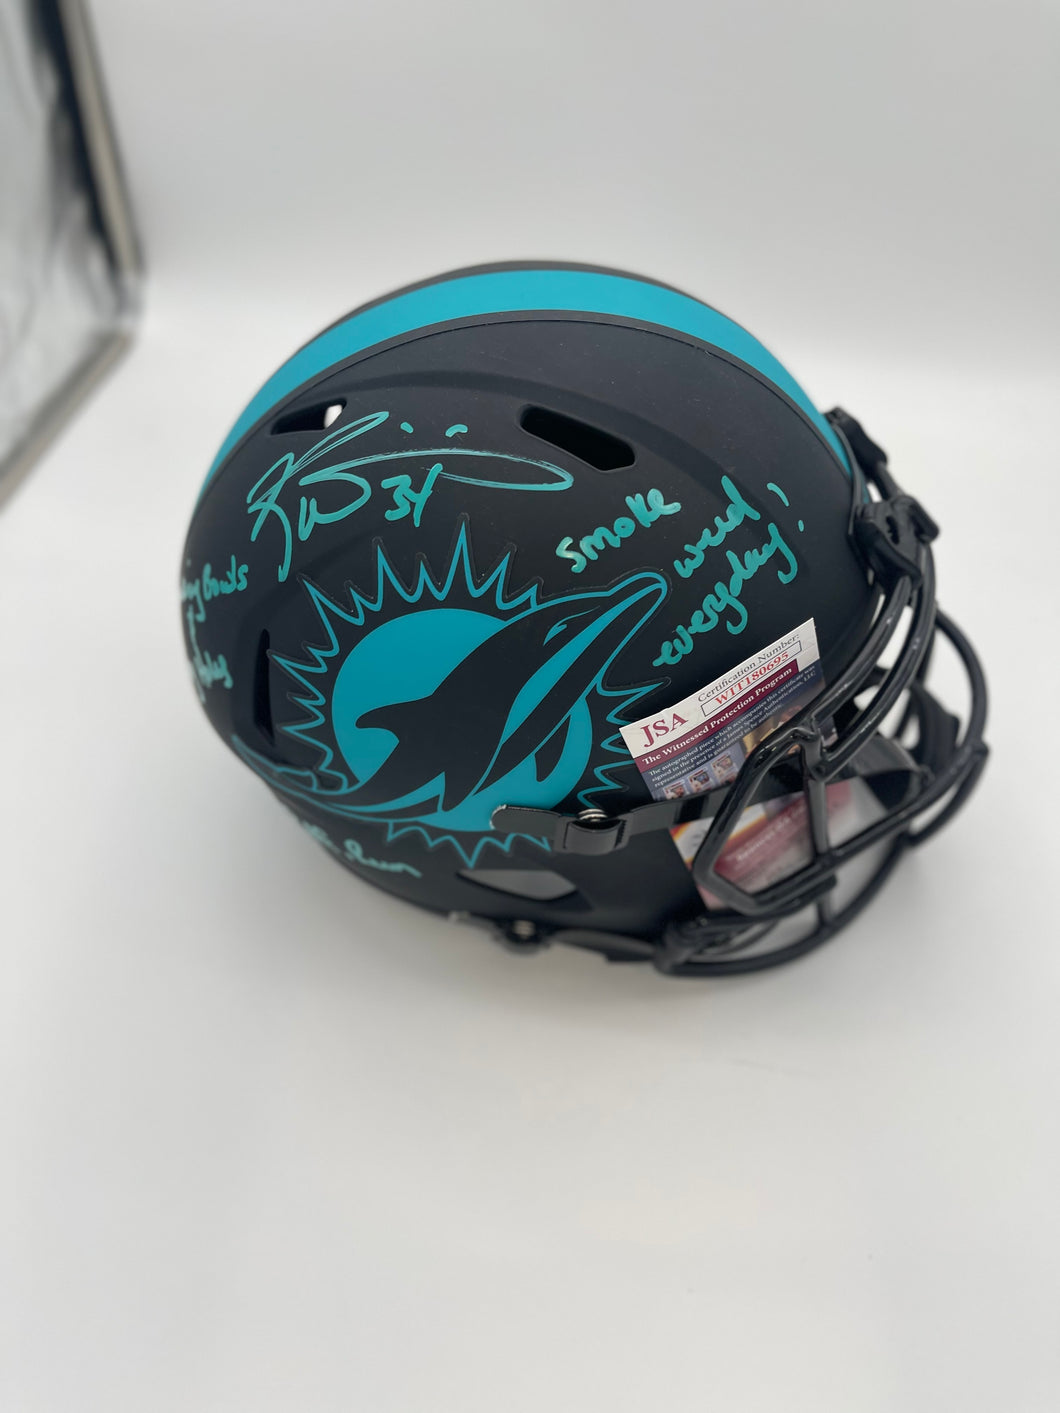 Ricky Williams signed full size helmet with multiple inscriptions